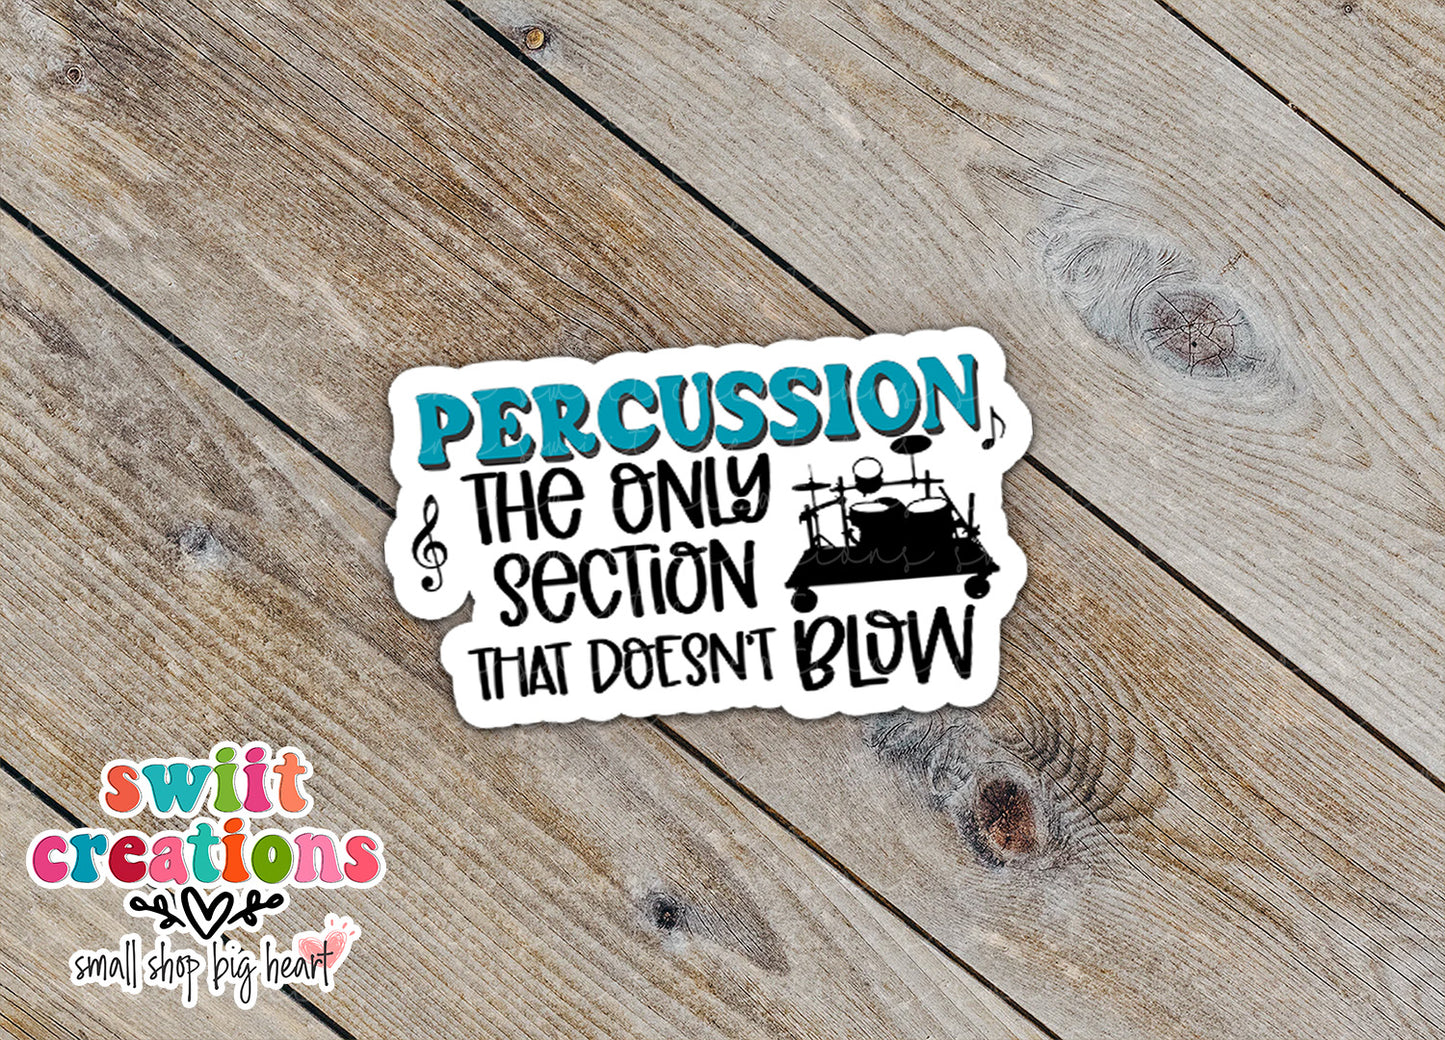 Percussion The Only Section That Doesn't Blow Waterproof Sticker (SS749)